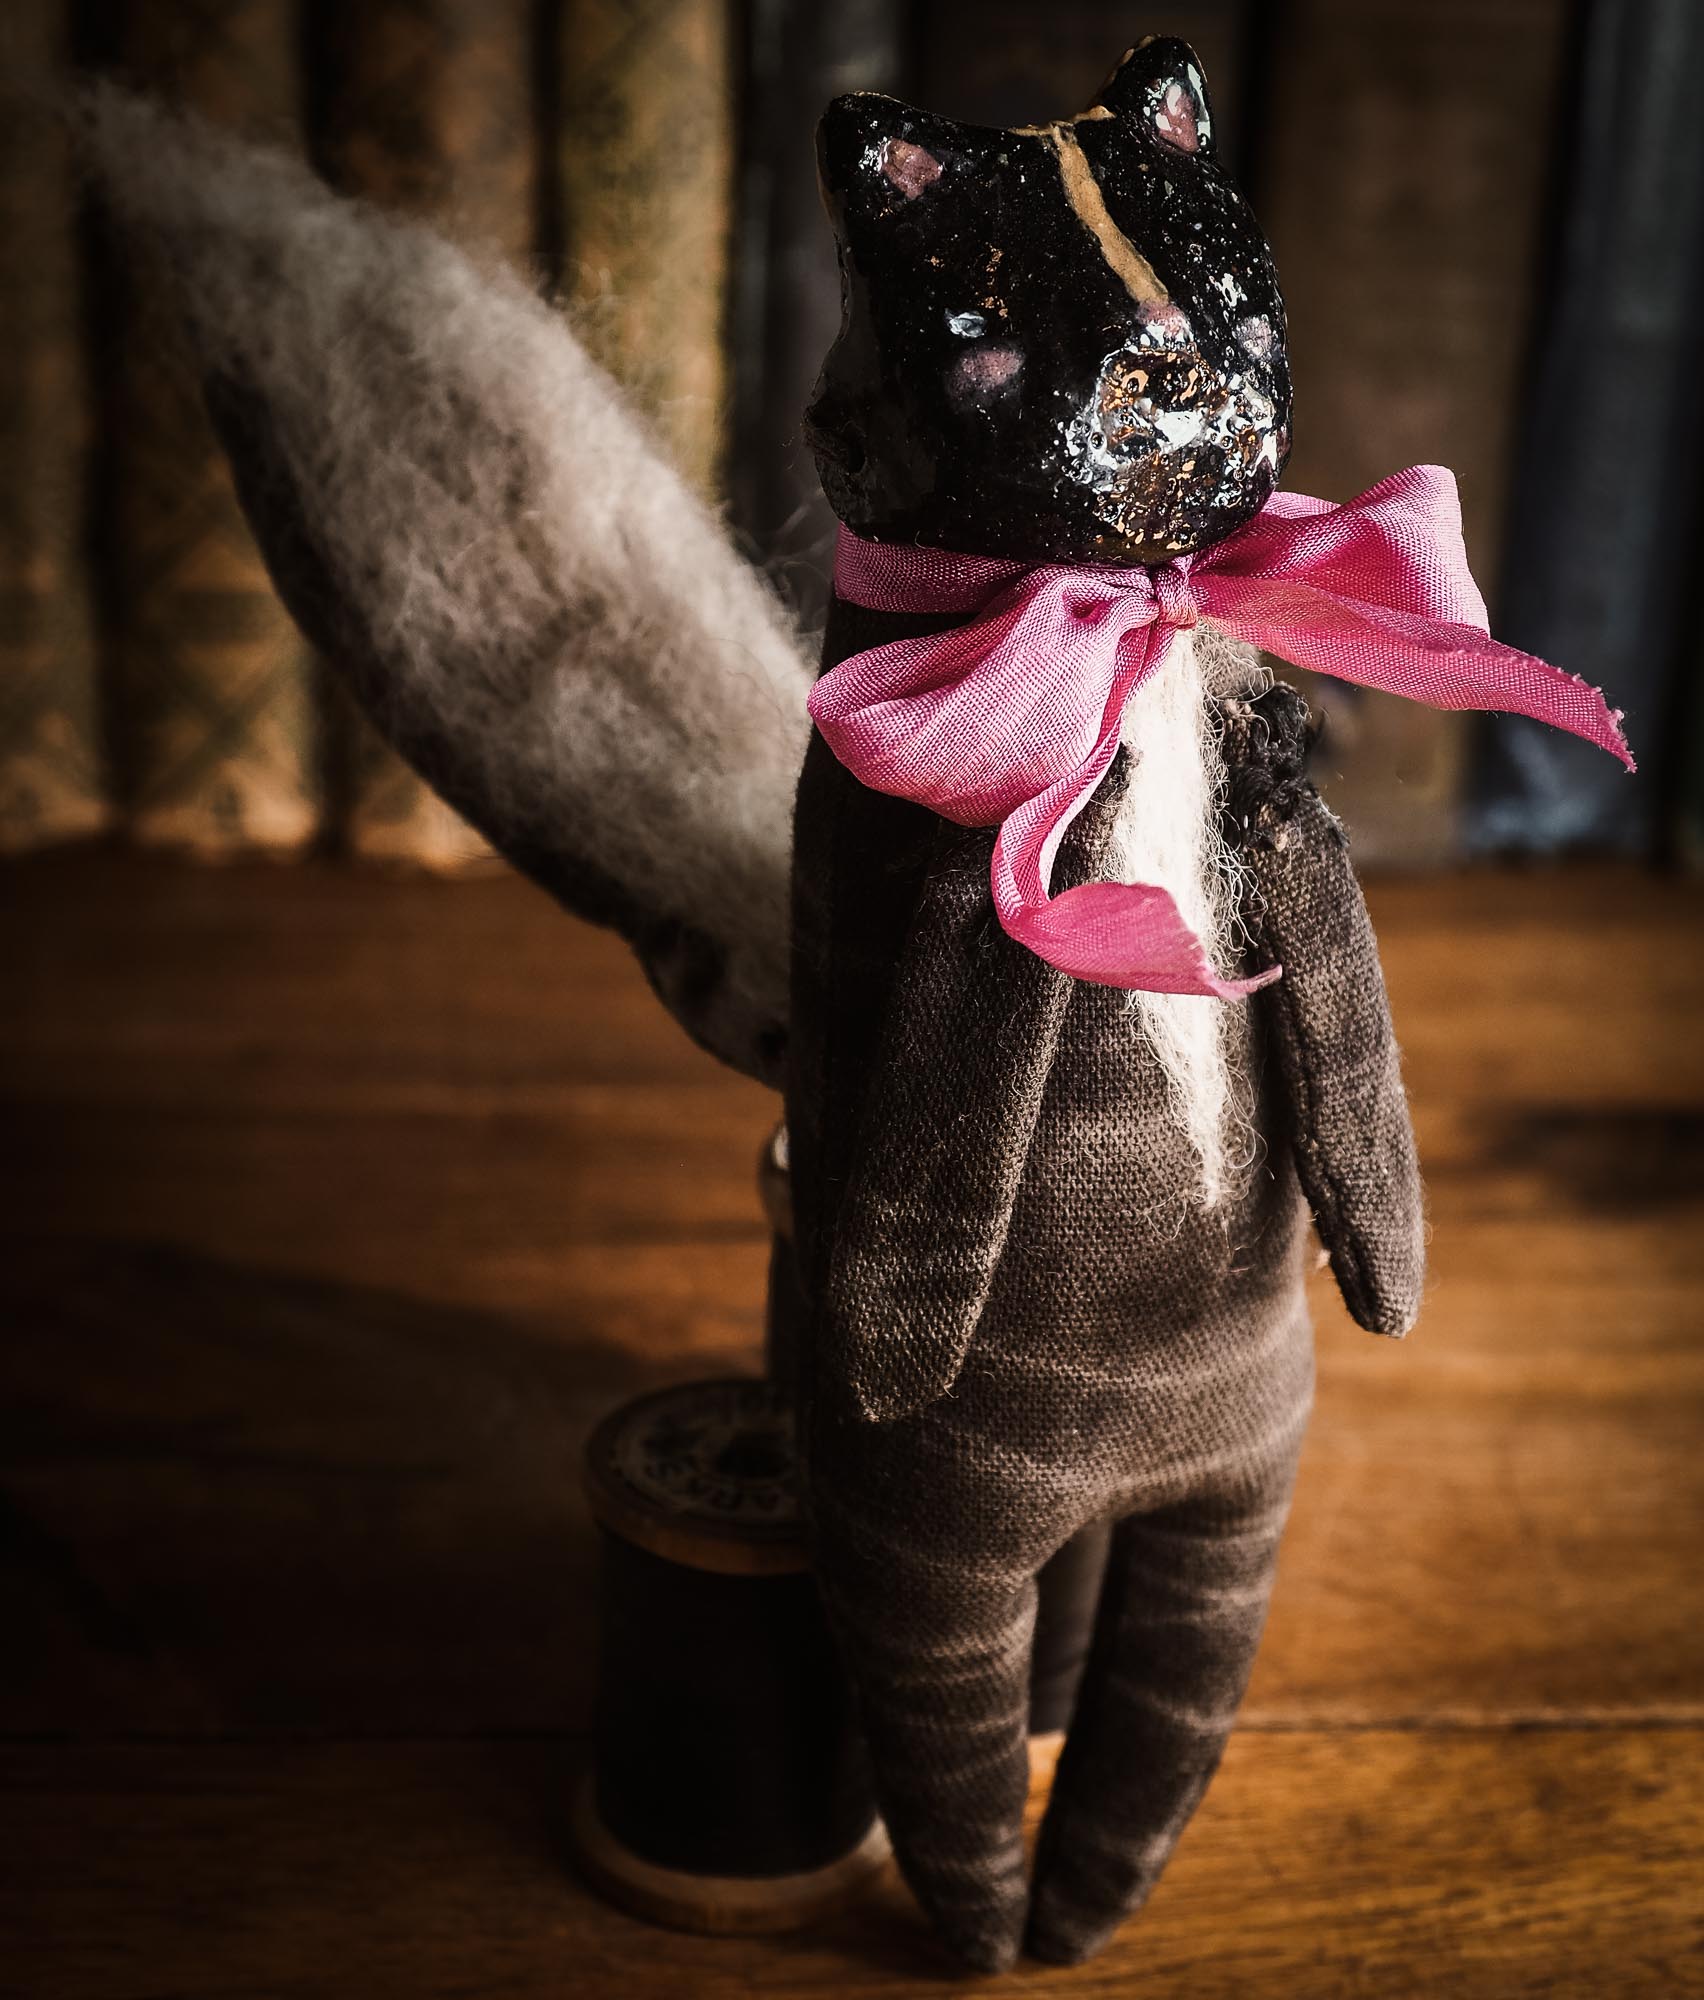 Skunk Toy Woodlands Soft sculpture art doll by Idania Salcido Danita Art with a Handmade ceramics face, organic dyed fabric and silk bow